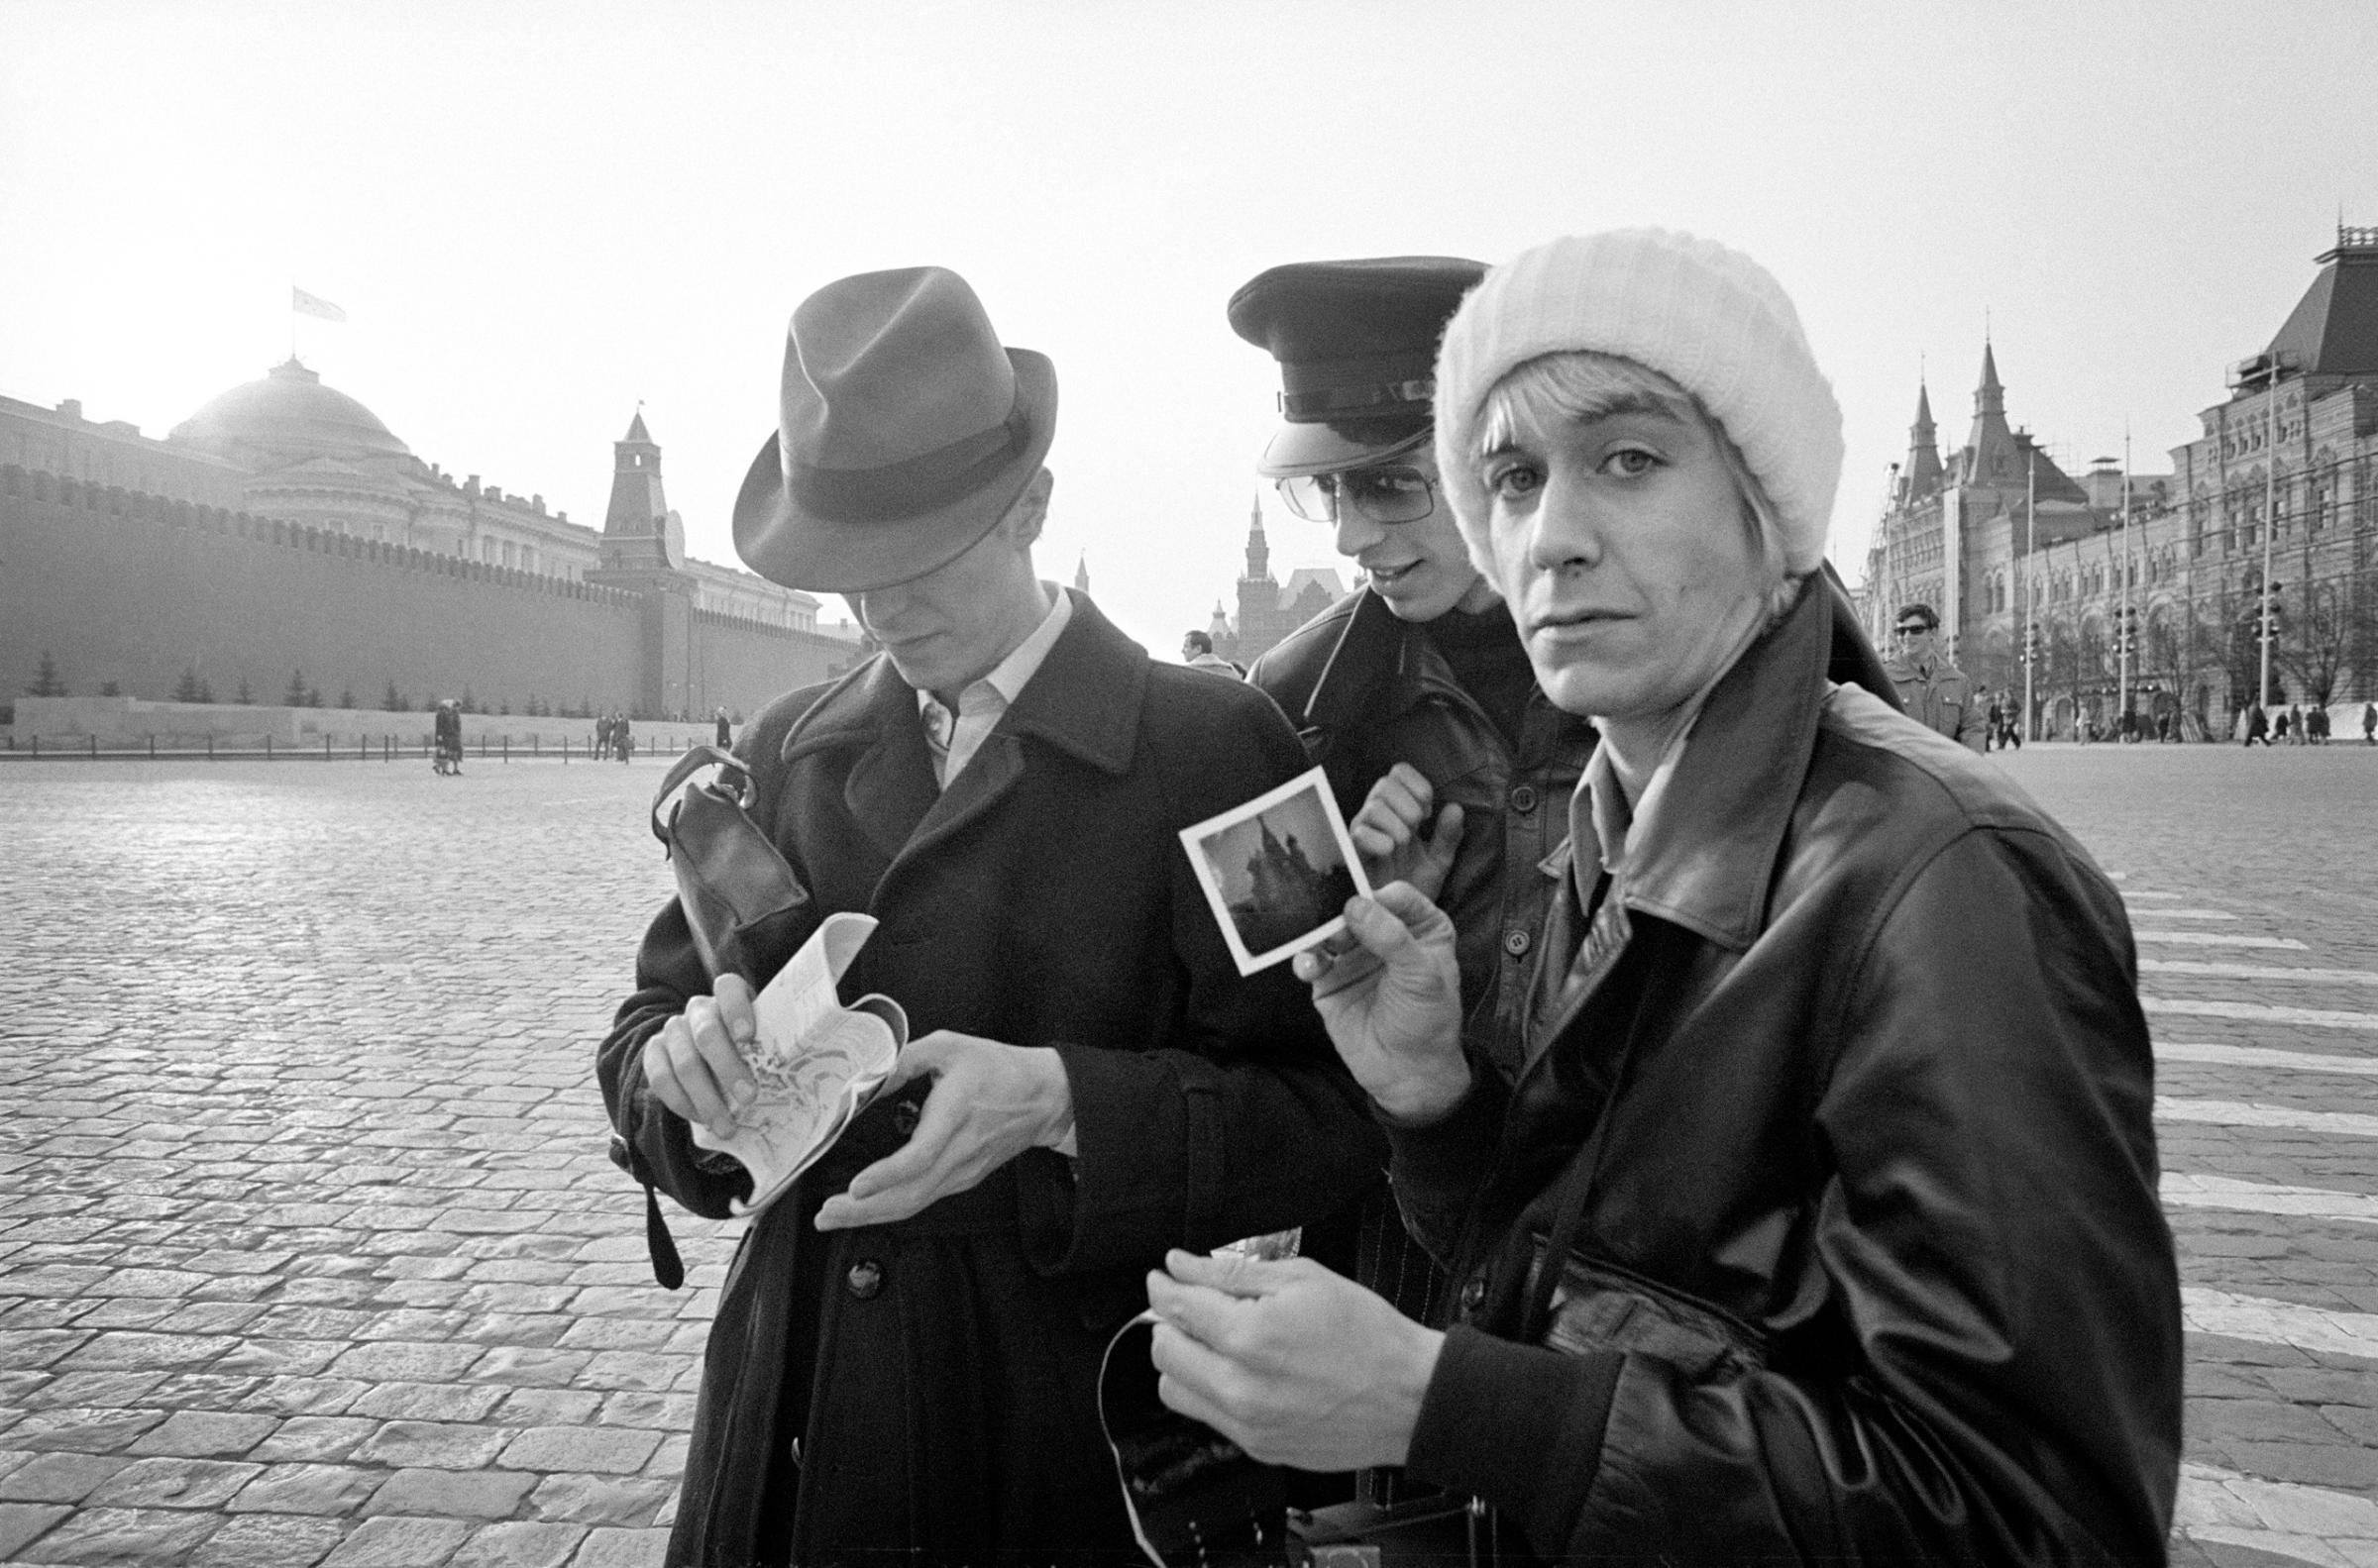 Iggy Pop flashes a Polaroid he'd just taken in Moscow's Red Square. Bowie and his tour manager, Pat Gibbons, are in the background.